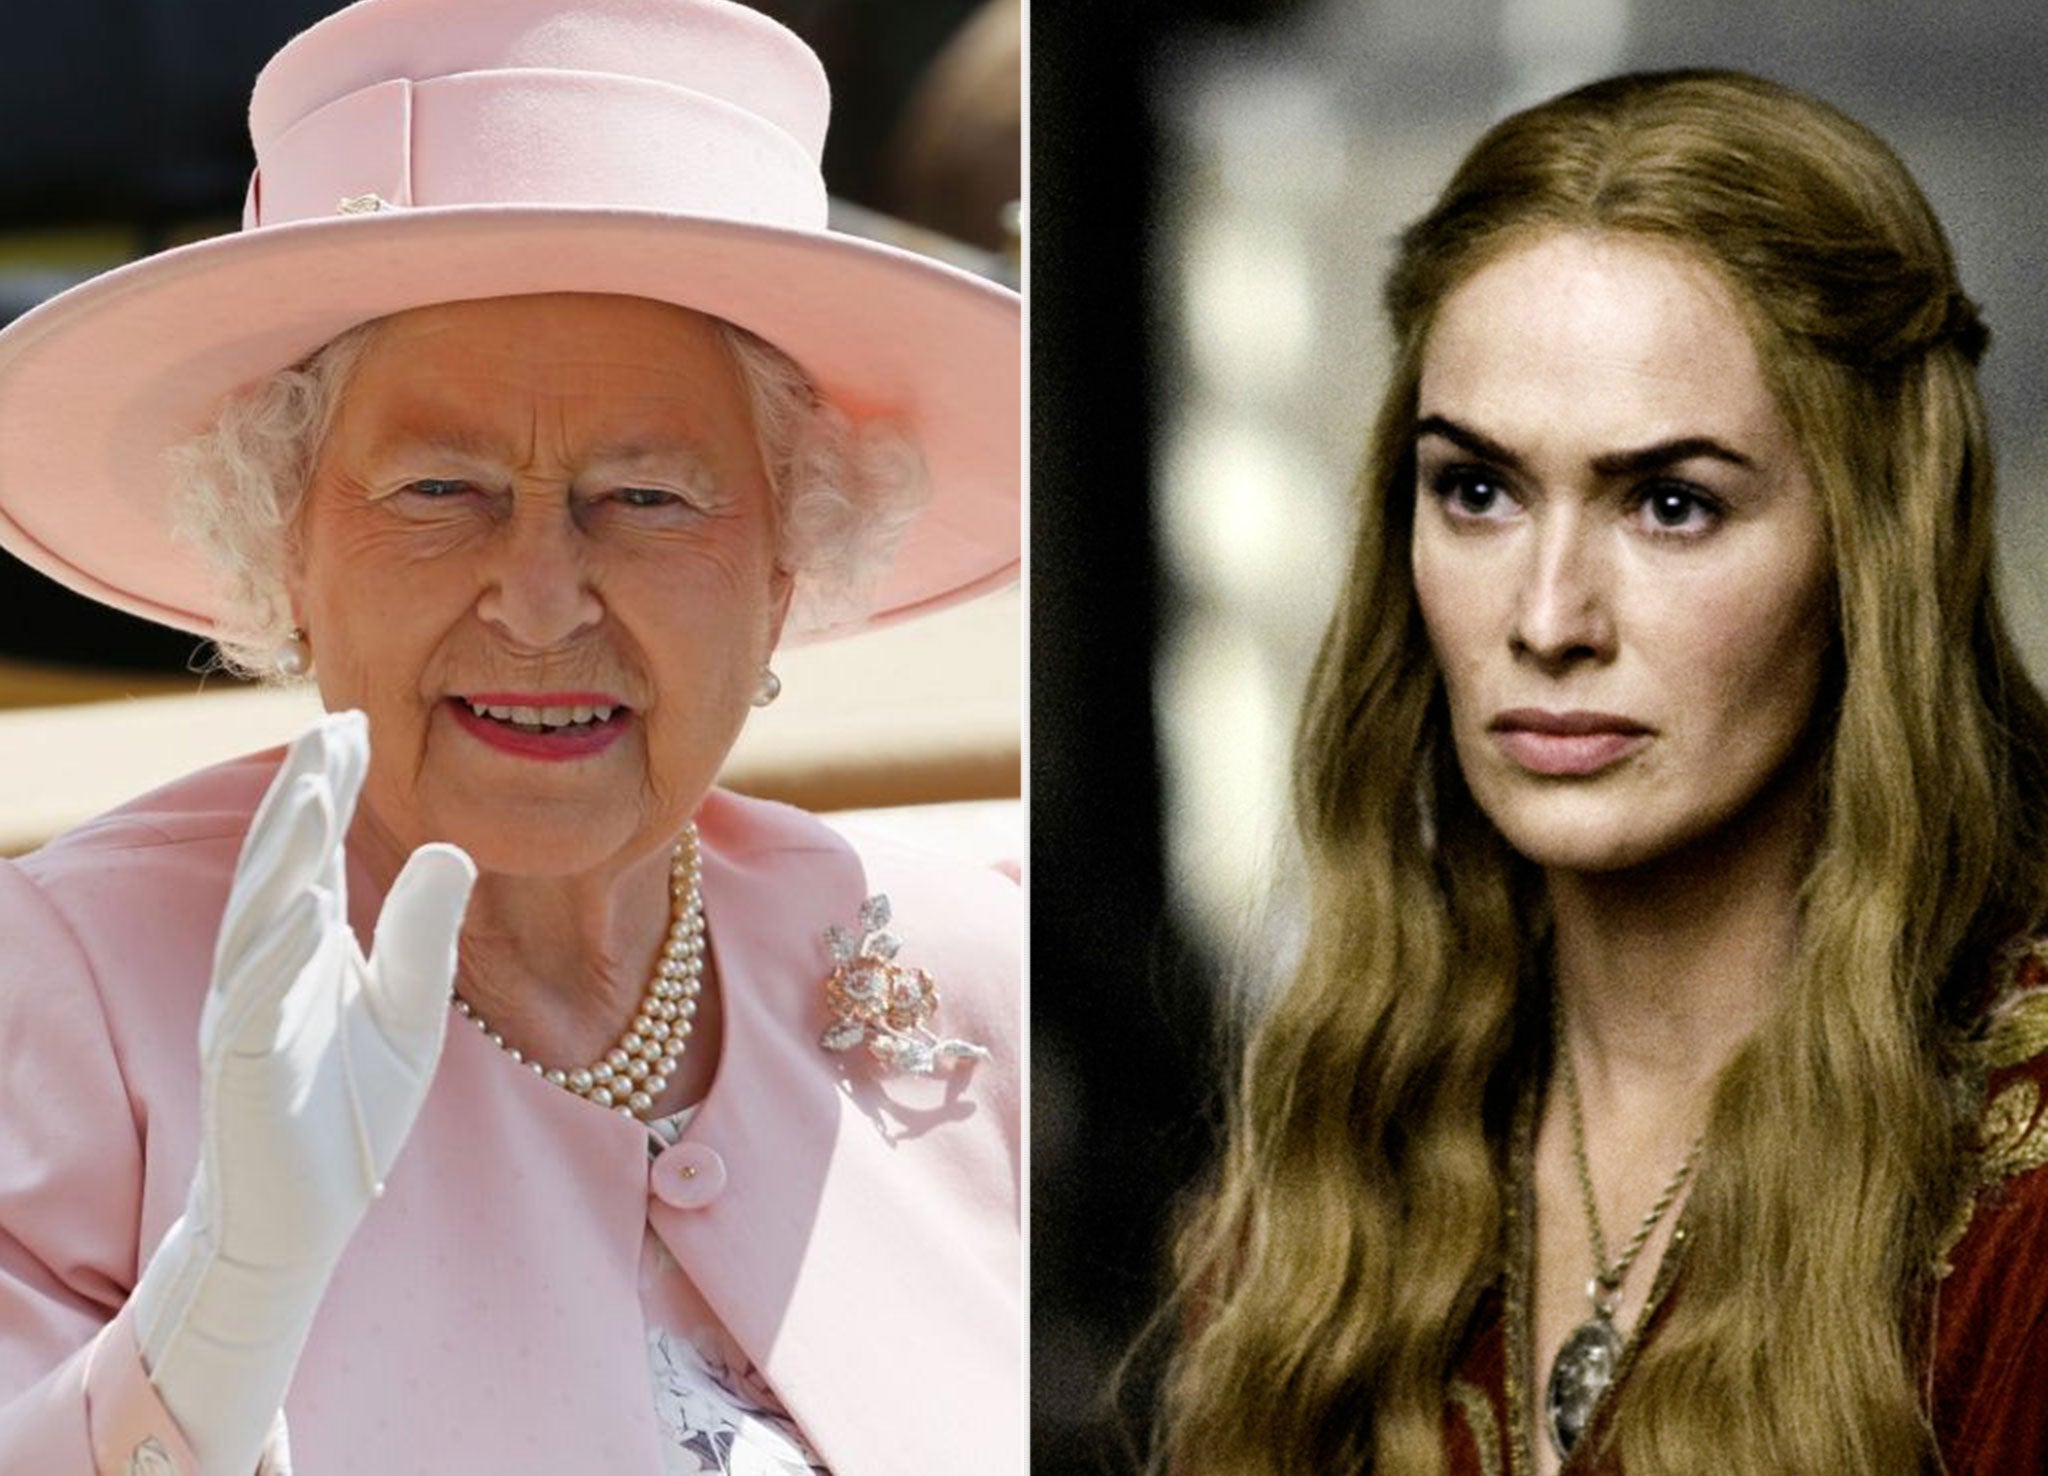 The Queen will visit the set of Game of Thrones, which stars Lena Headey, right, as Queen Cersei Lannister